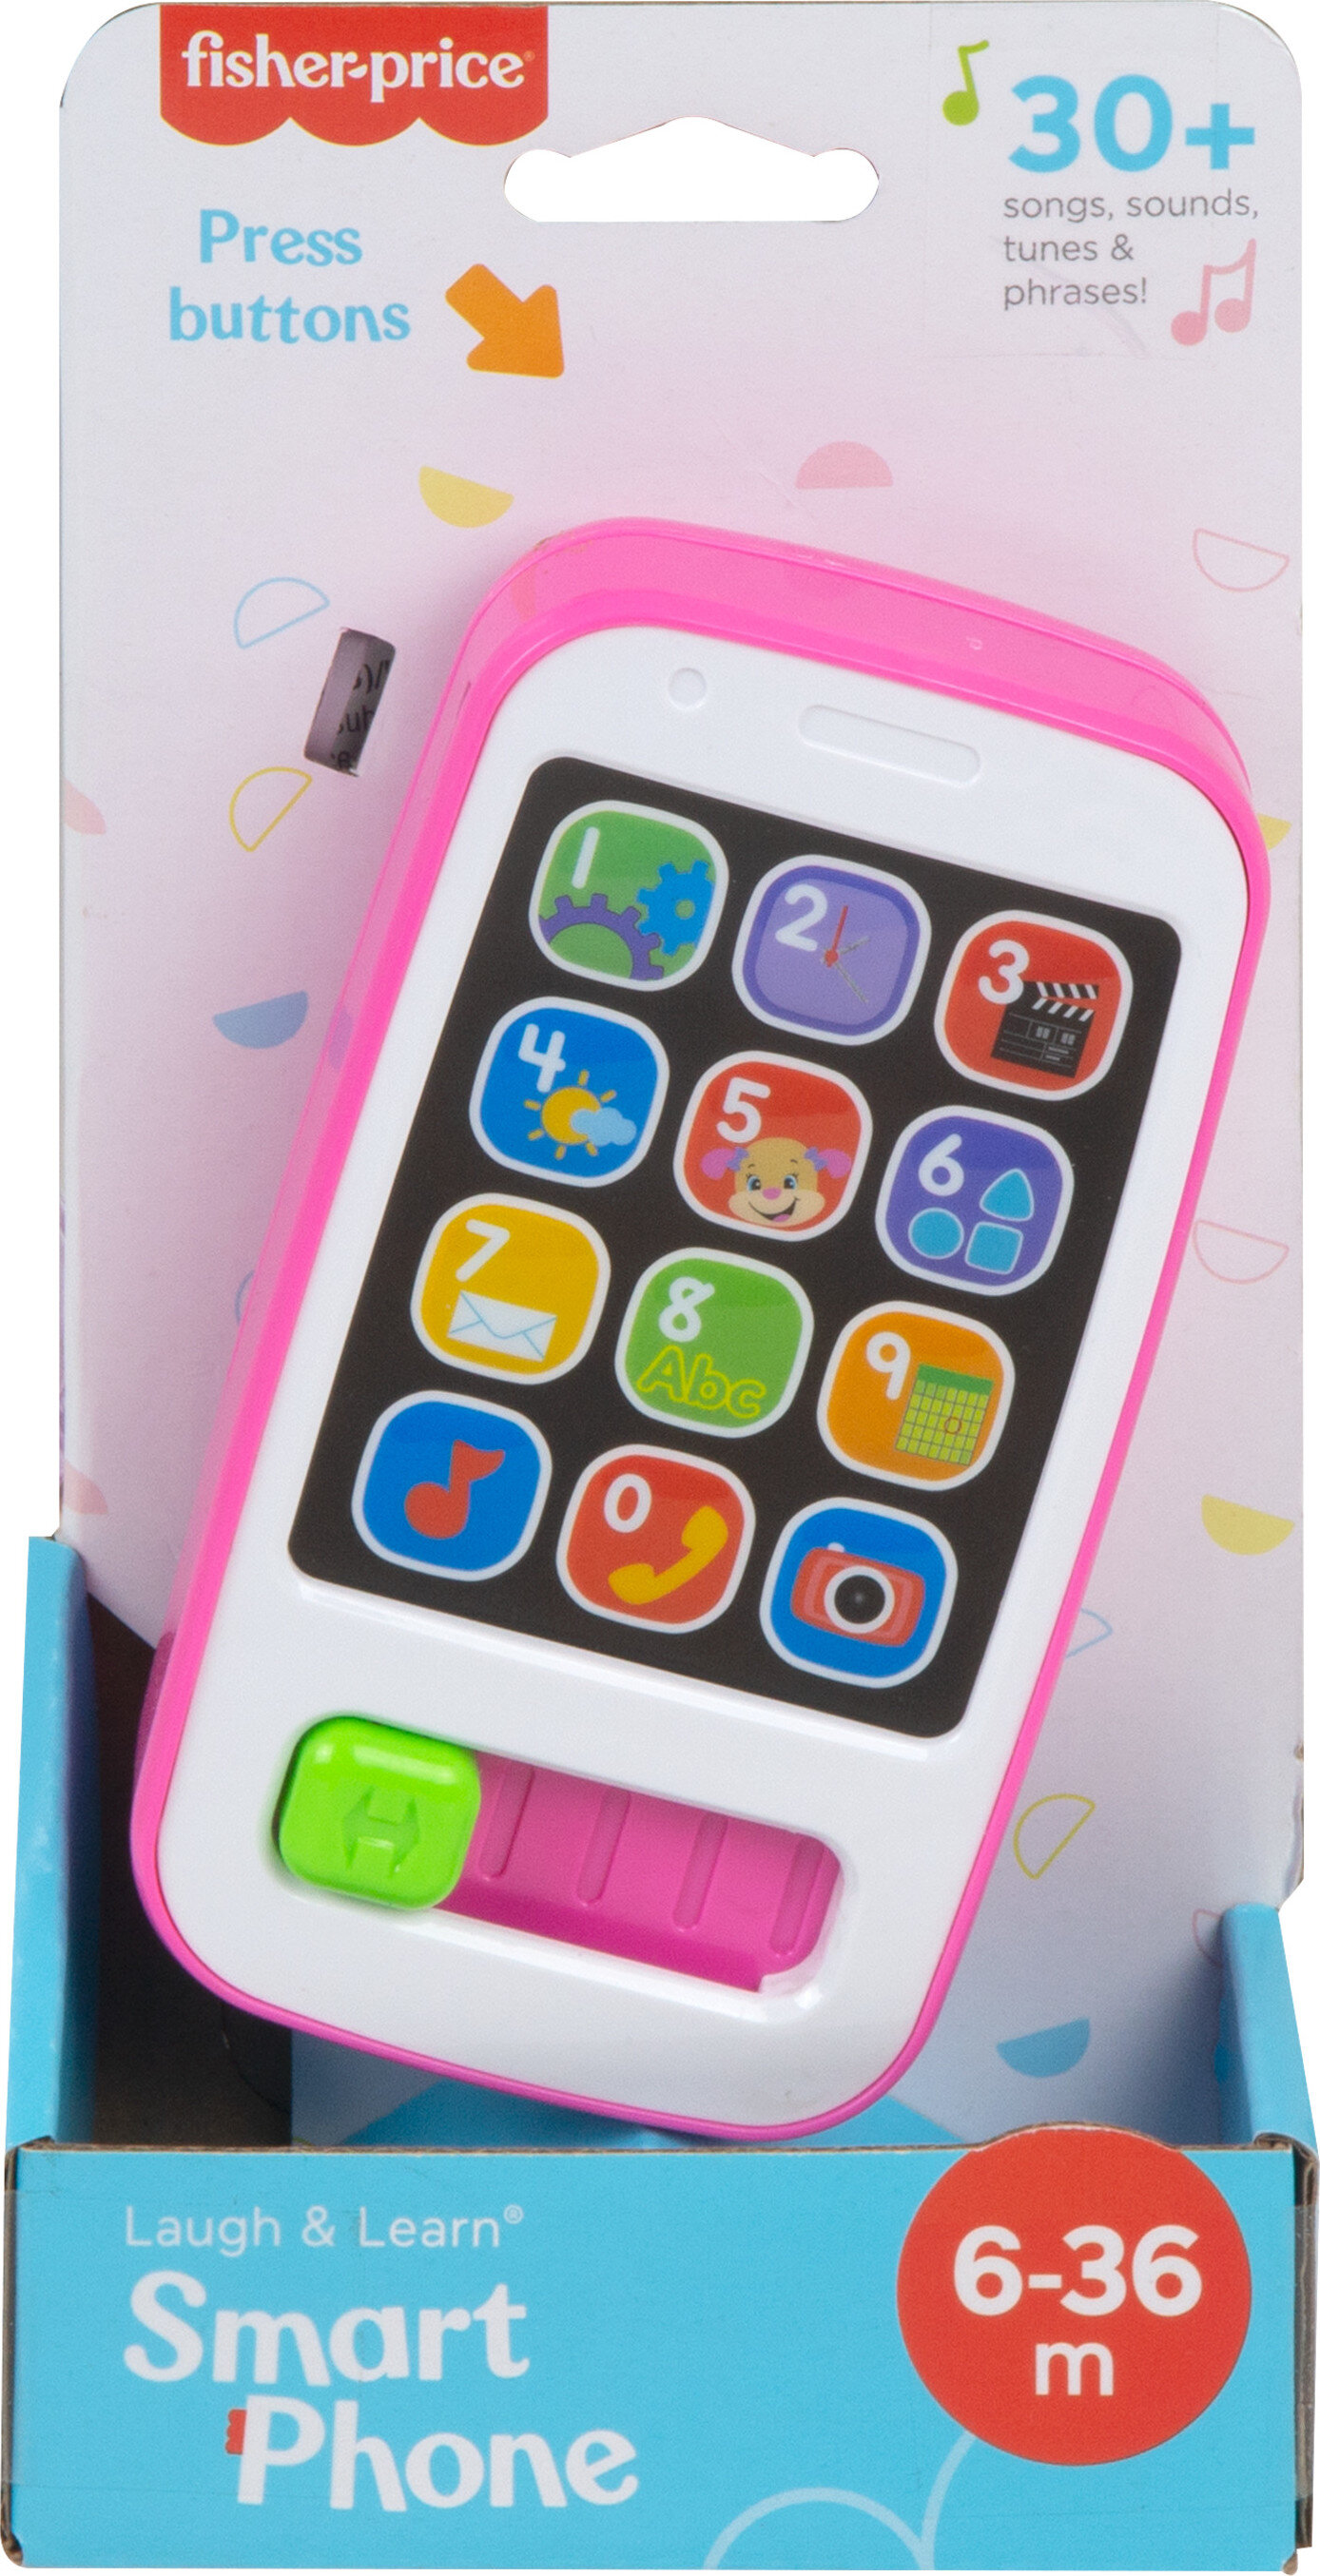 Fisher-Price Laugh & Learn Smart Phone Electronic Baby Learning Toy with Lights & Sounds, Pink - image 1 of 6